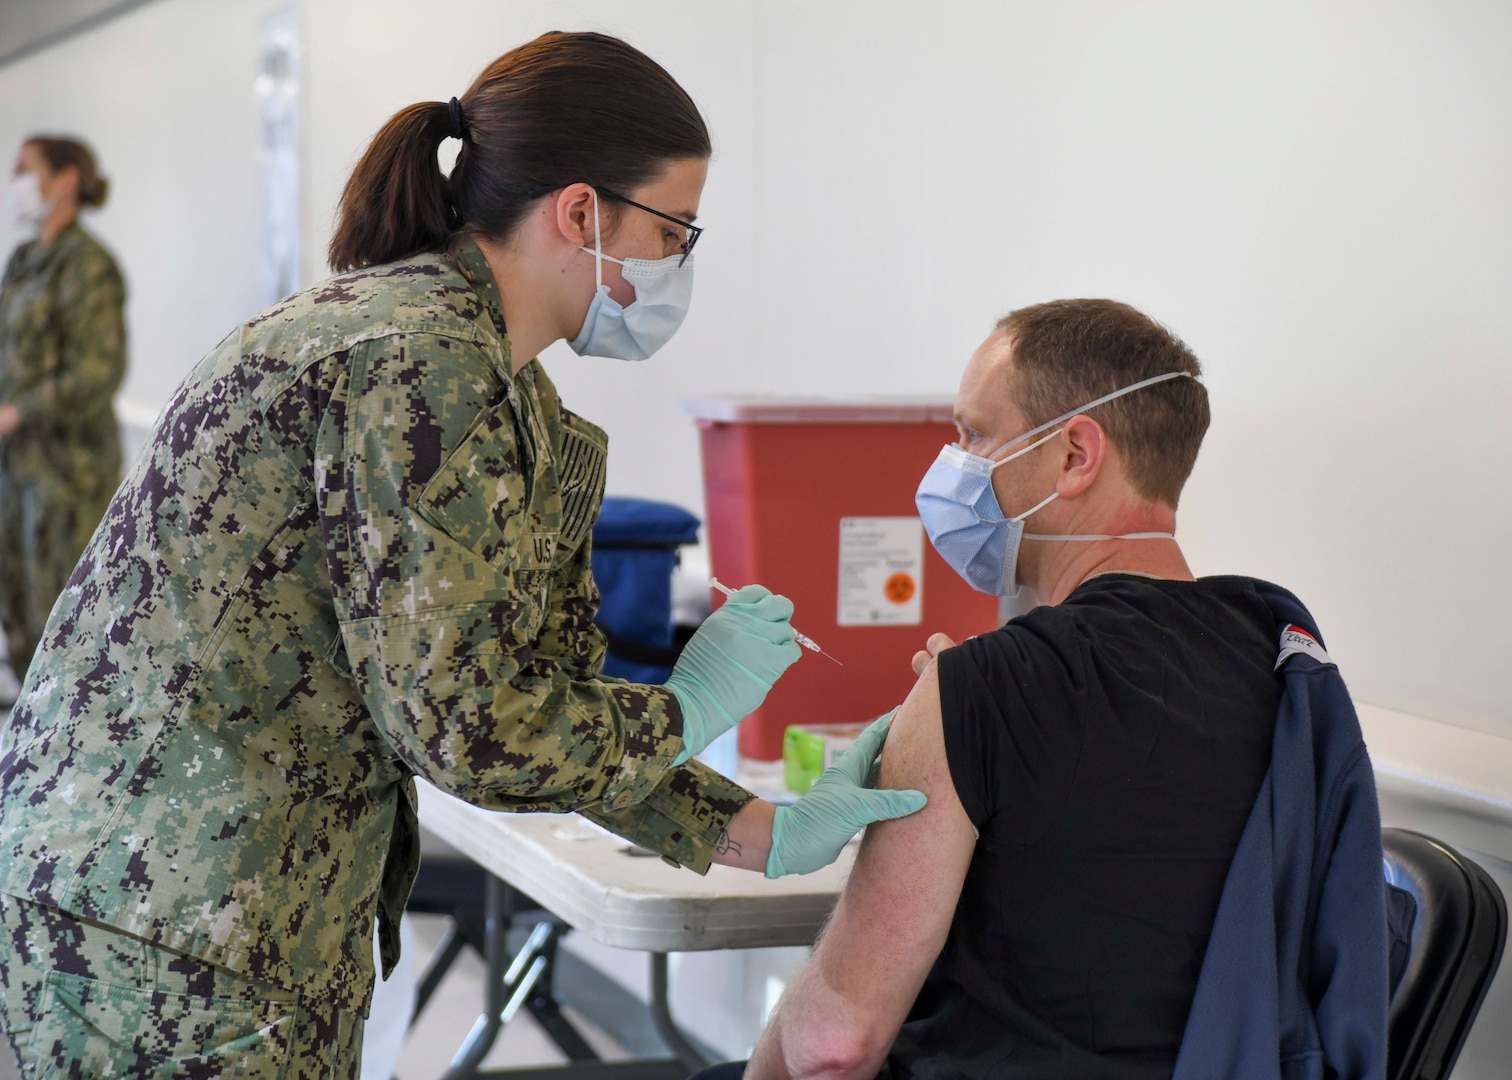 On December 28, 2020, Naval Medical Center Camp Lejeune administered the first doses of the Pfizer/BioNTech COVID-19 vaccine. Per the Department of Defense’s strategic plan for distribution and administration of the vaccine, initial vaccinations were given to frontline health care providers and personnel as identified by the facility.